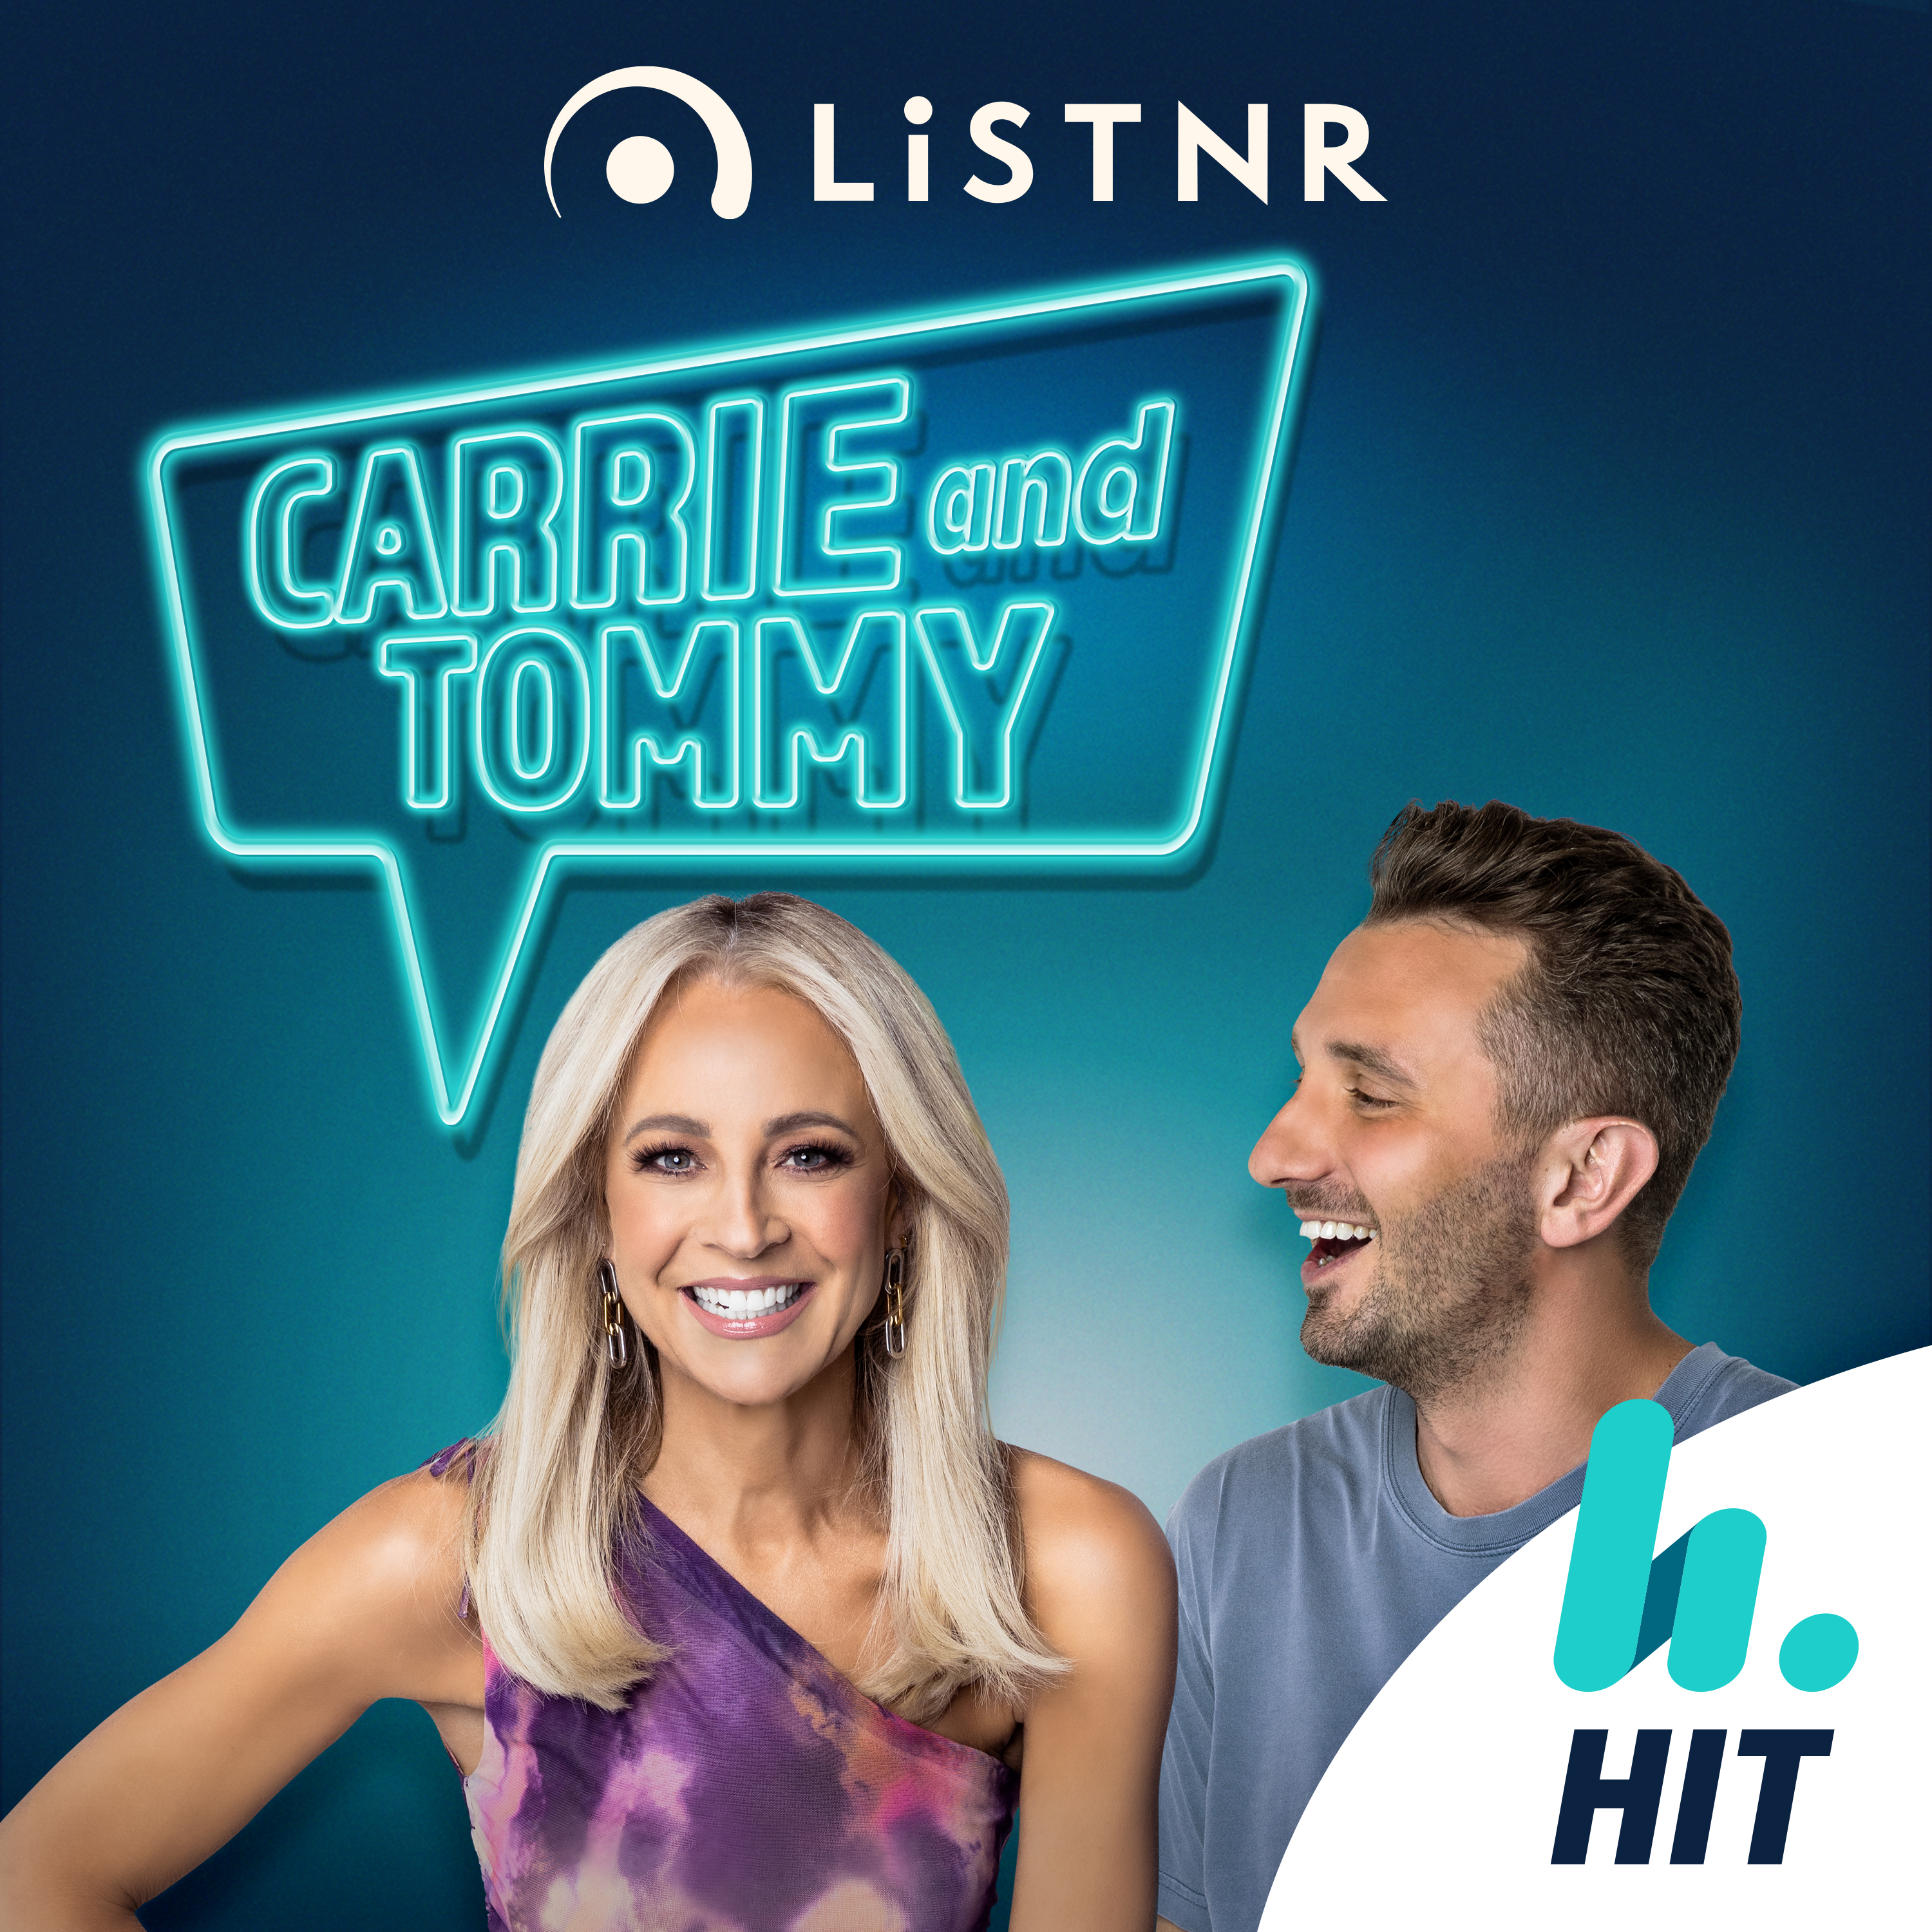 On Mix94.5, Carrie's mum is BANNED from seeing Tommy's comedy, Tommy's FLYING MISHAP, AND Jock Zonfrillo!